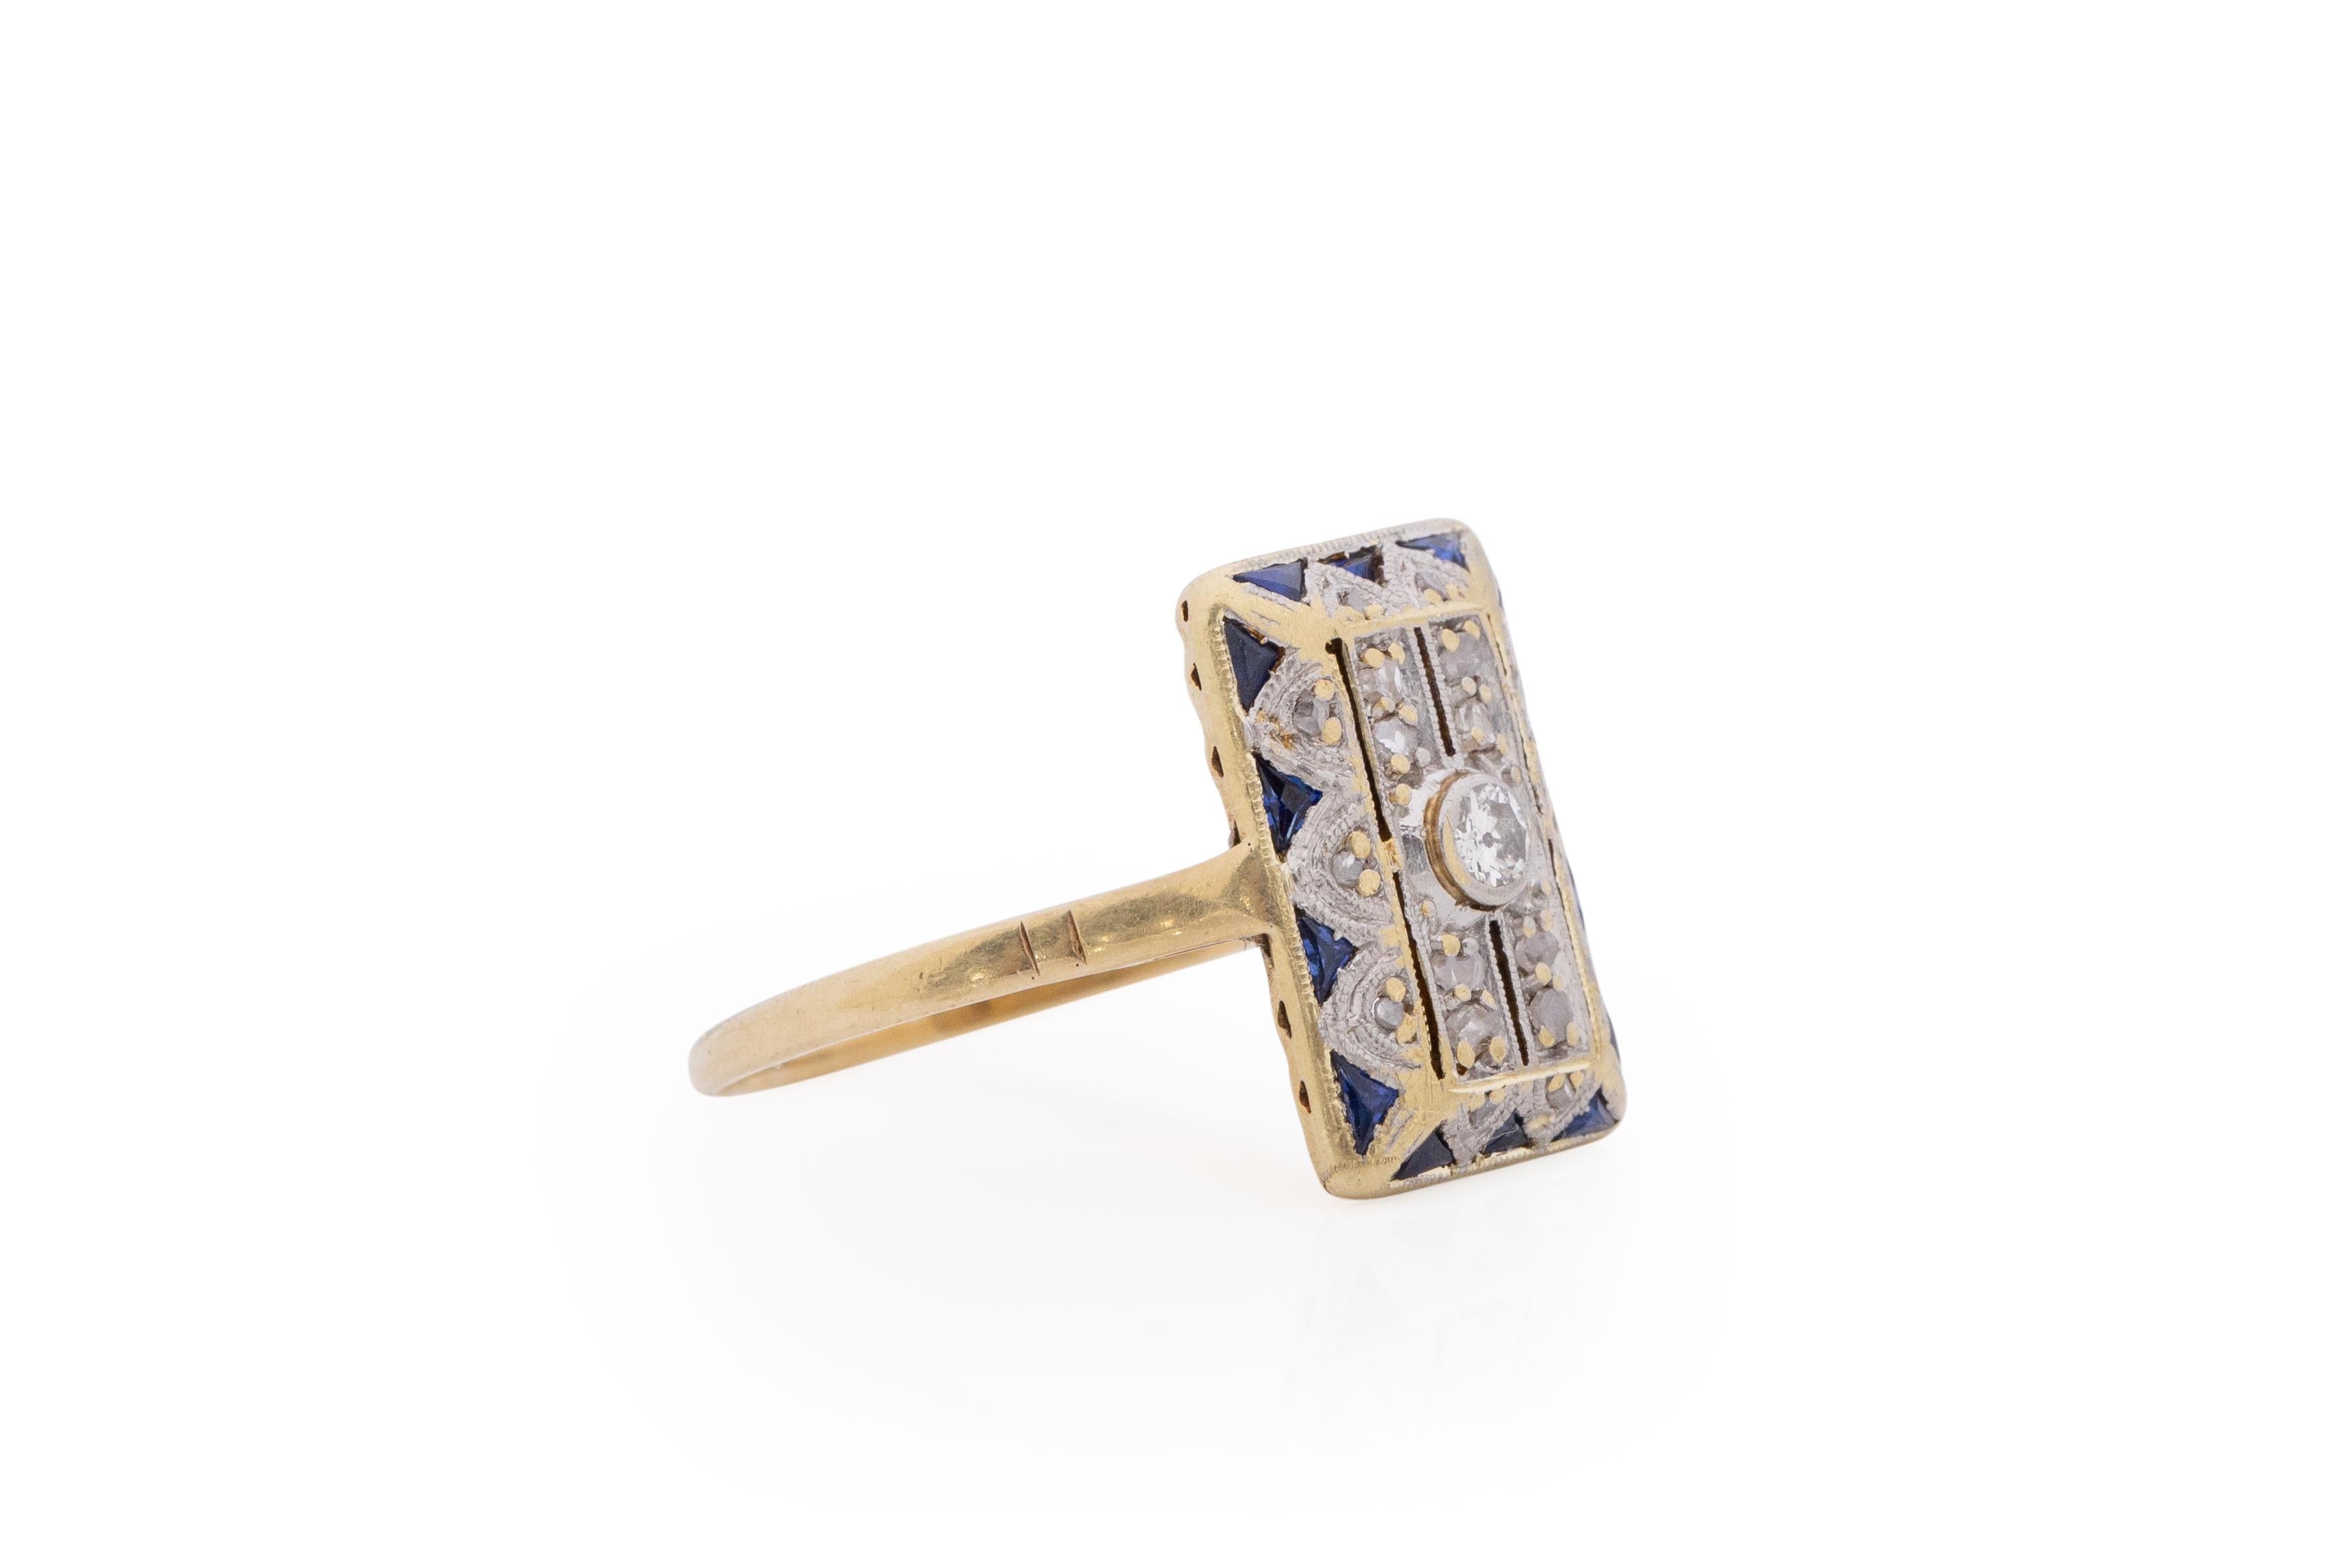 Item Details: 
Ring Size: 7.75
Metal Type: Platinum Top & 14 Karat Gold [Hallmarked, and Tested]
Weight: . grams

Diamond Details:
Weight: .20 carat total weight
Cut: Old European brilliant
Color: H
Clarity: VS

Side Stone Details:
Sapphire,